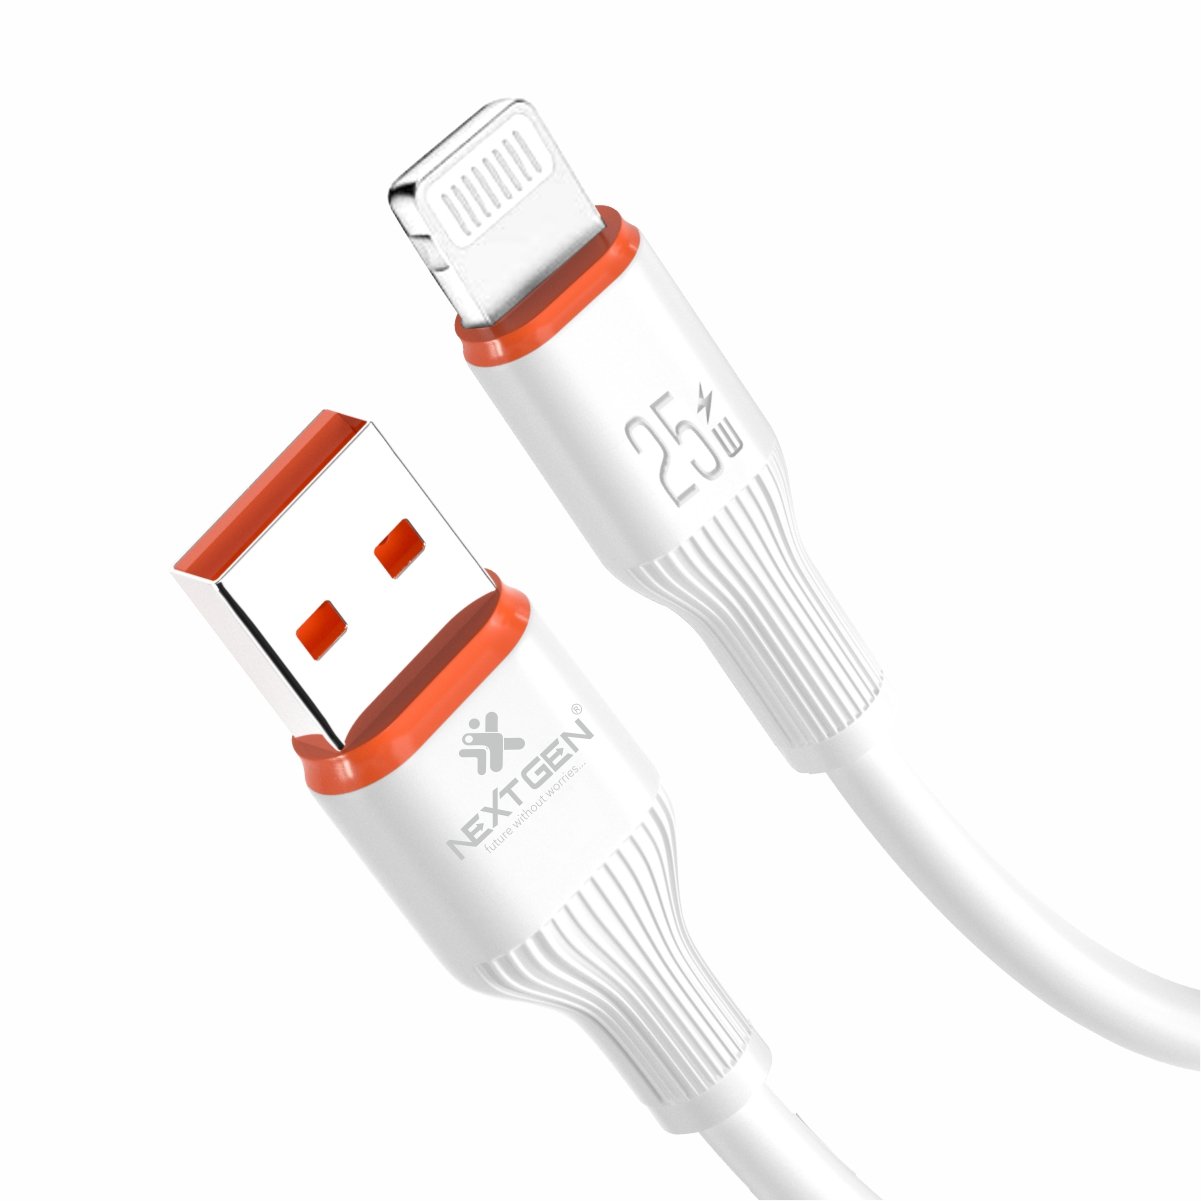 NGDC-545 Lightning Rapidly Fast Charge & Sync Data Cable